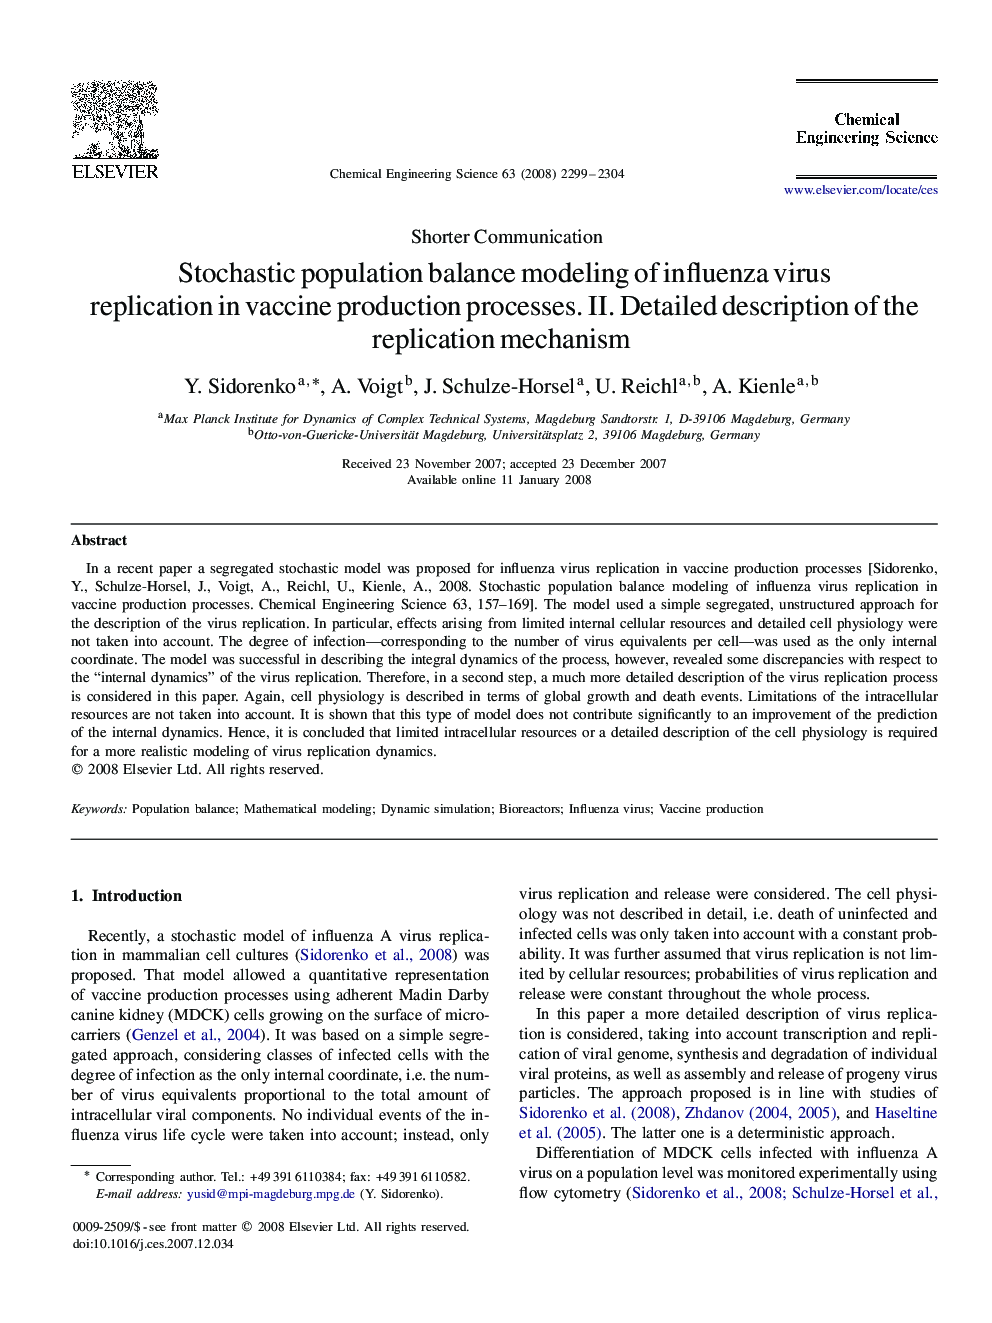 Stochastic population balance modeling of influenza virus replication in vaccine production processes. II. Detailed description of the replication mechanism